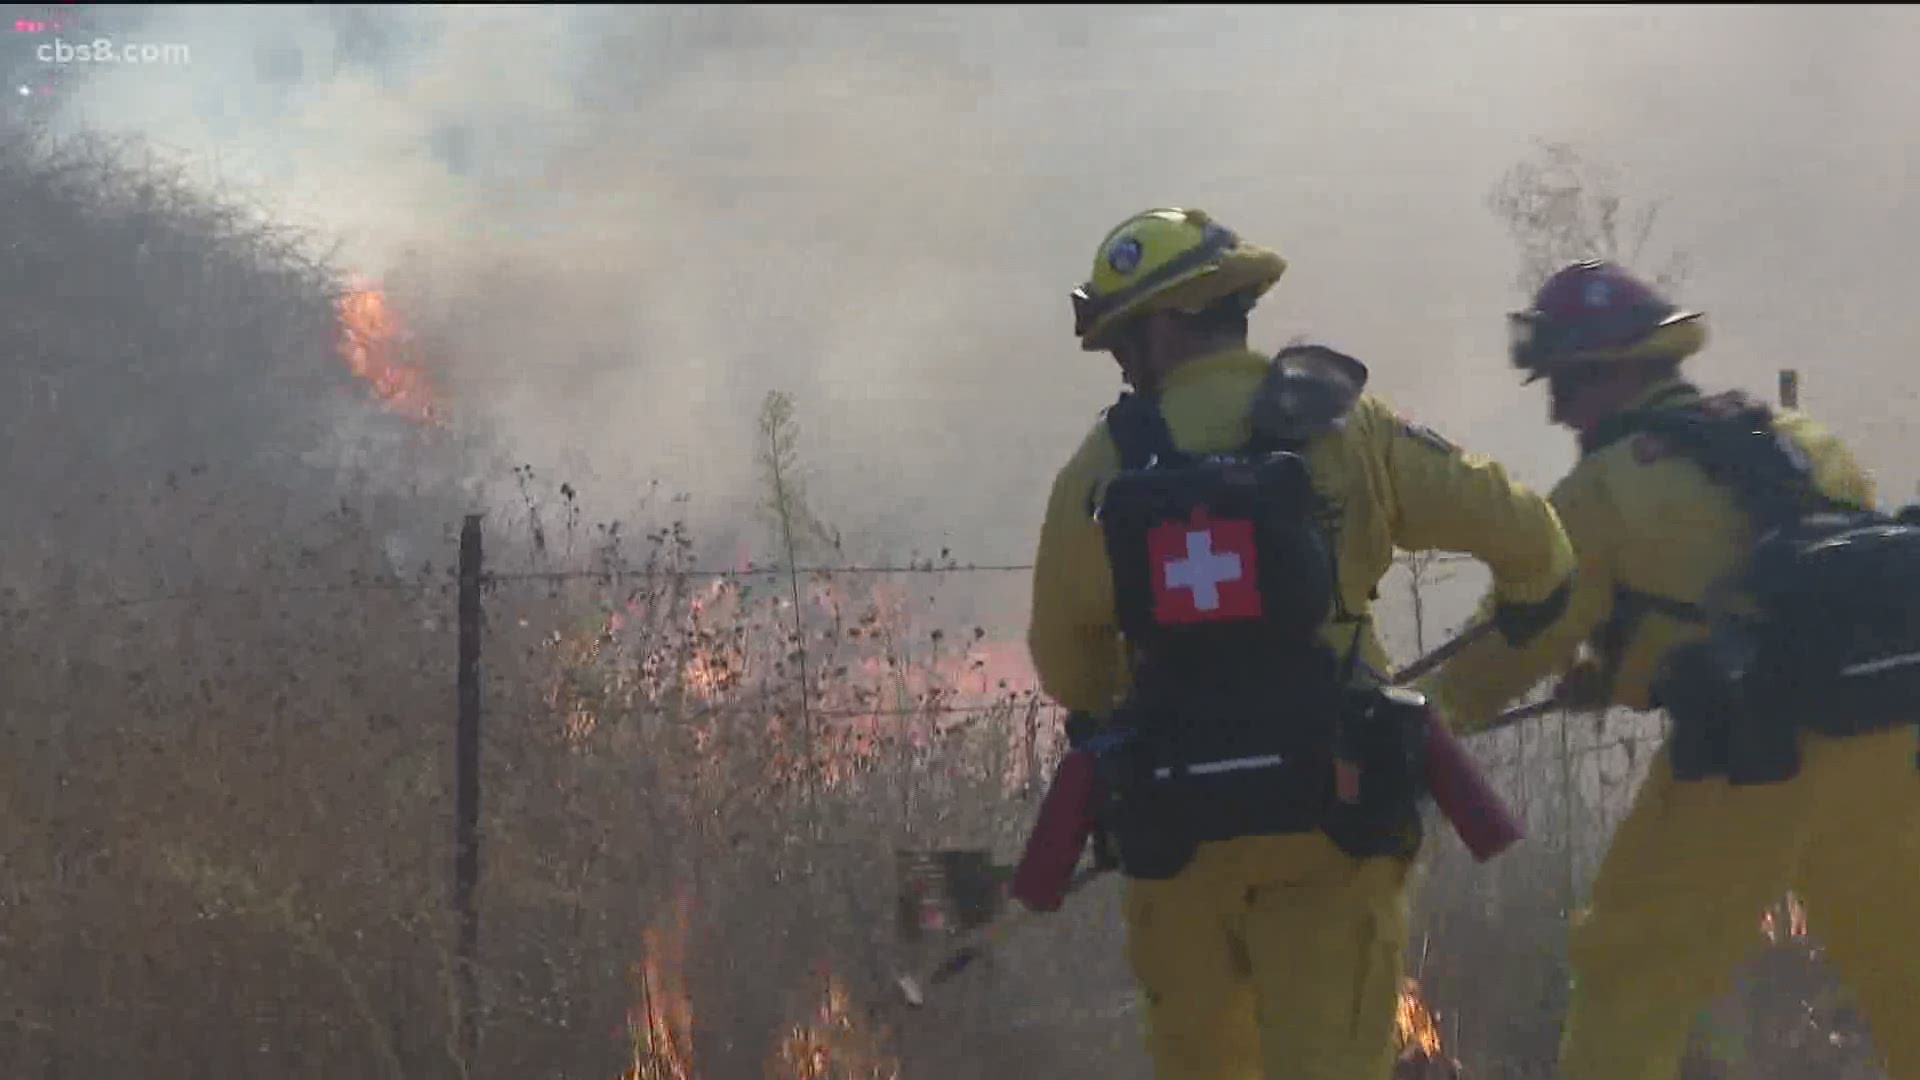 California's governor provided an update on the state's wildfire season preparation while battling coronavirus.